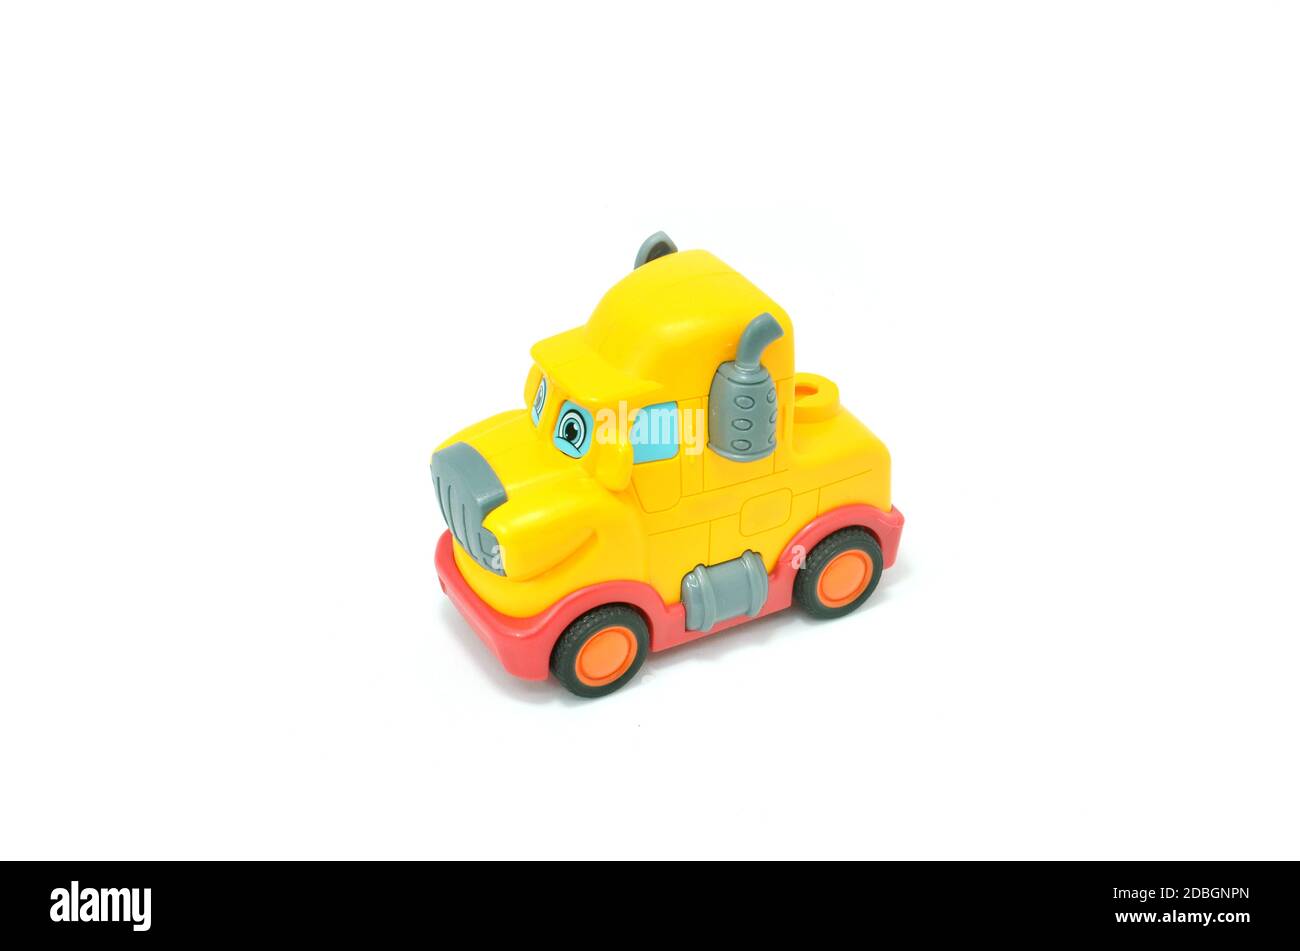 Toy car truck, isolated in white background Stock Photo